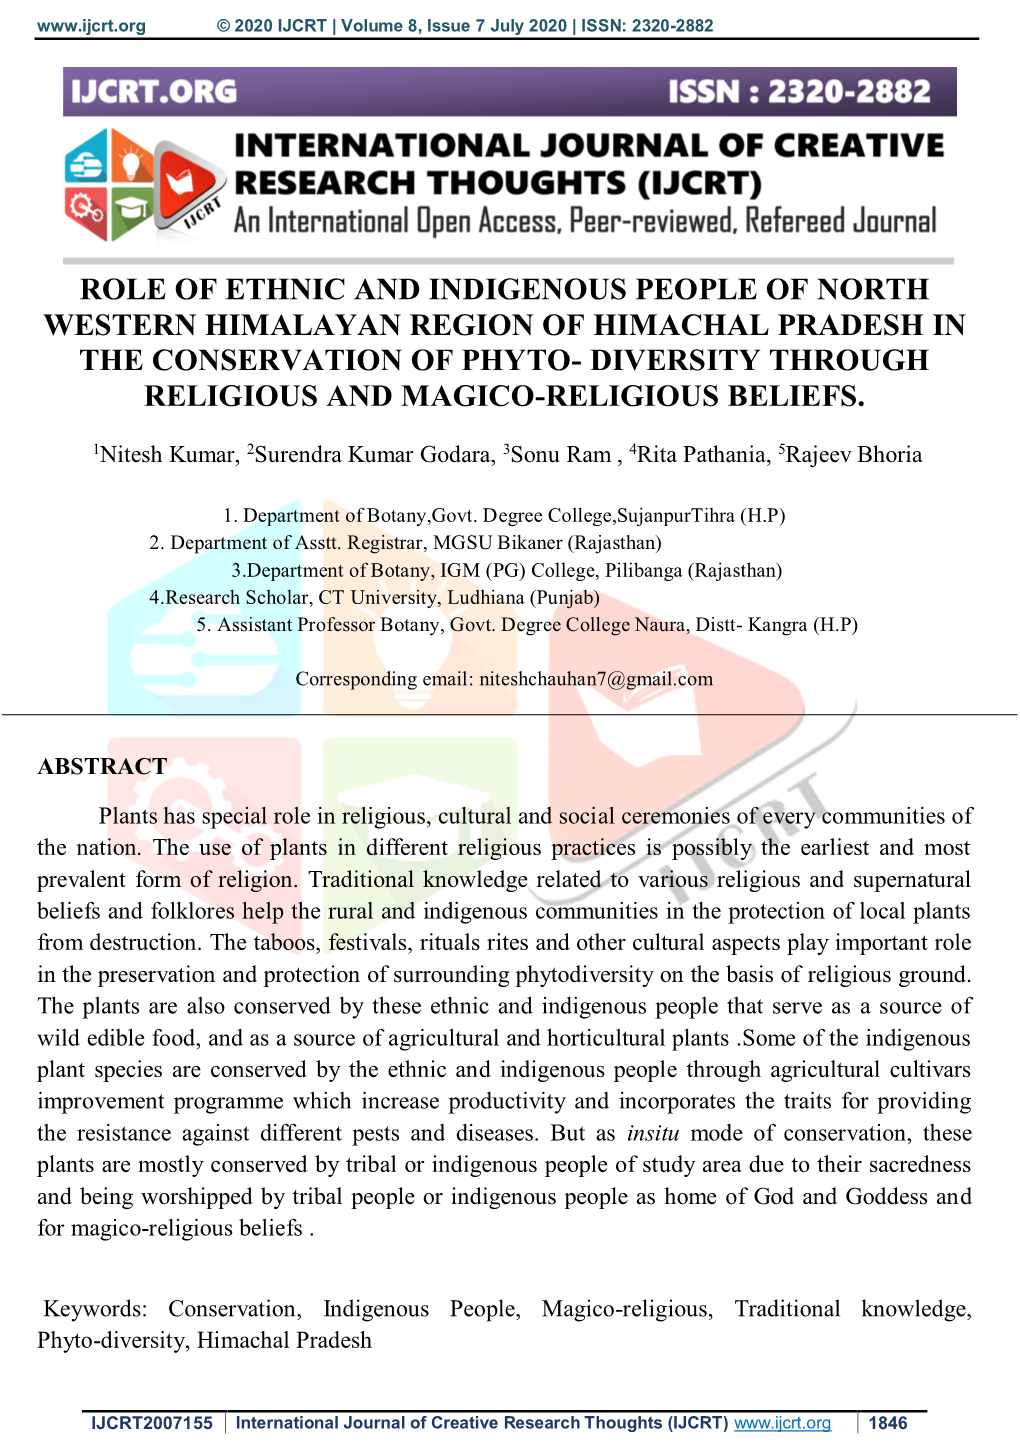 Role of Ethnic and Indigenous People of North